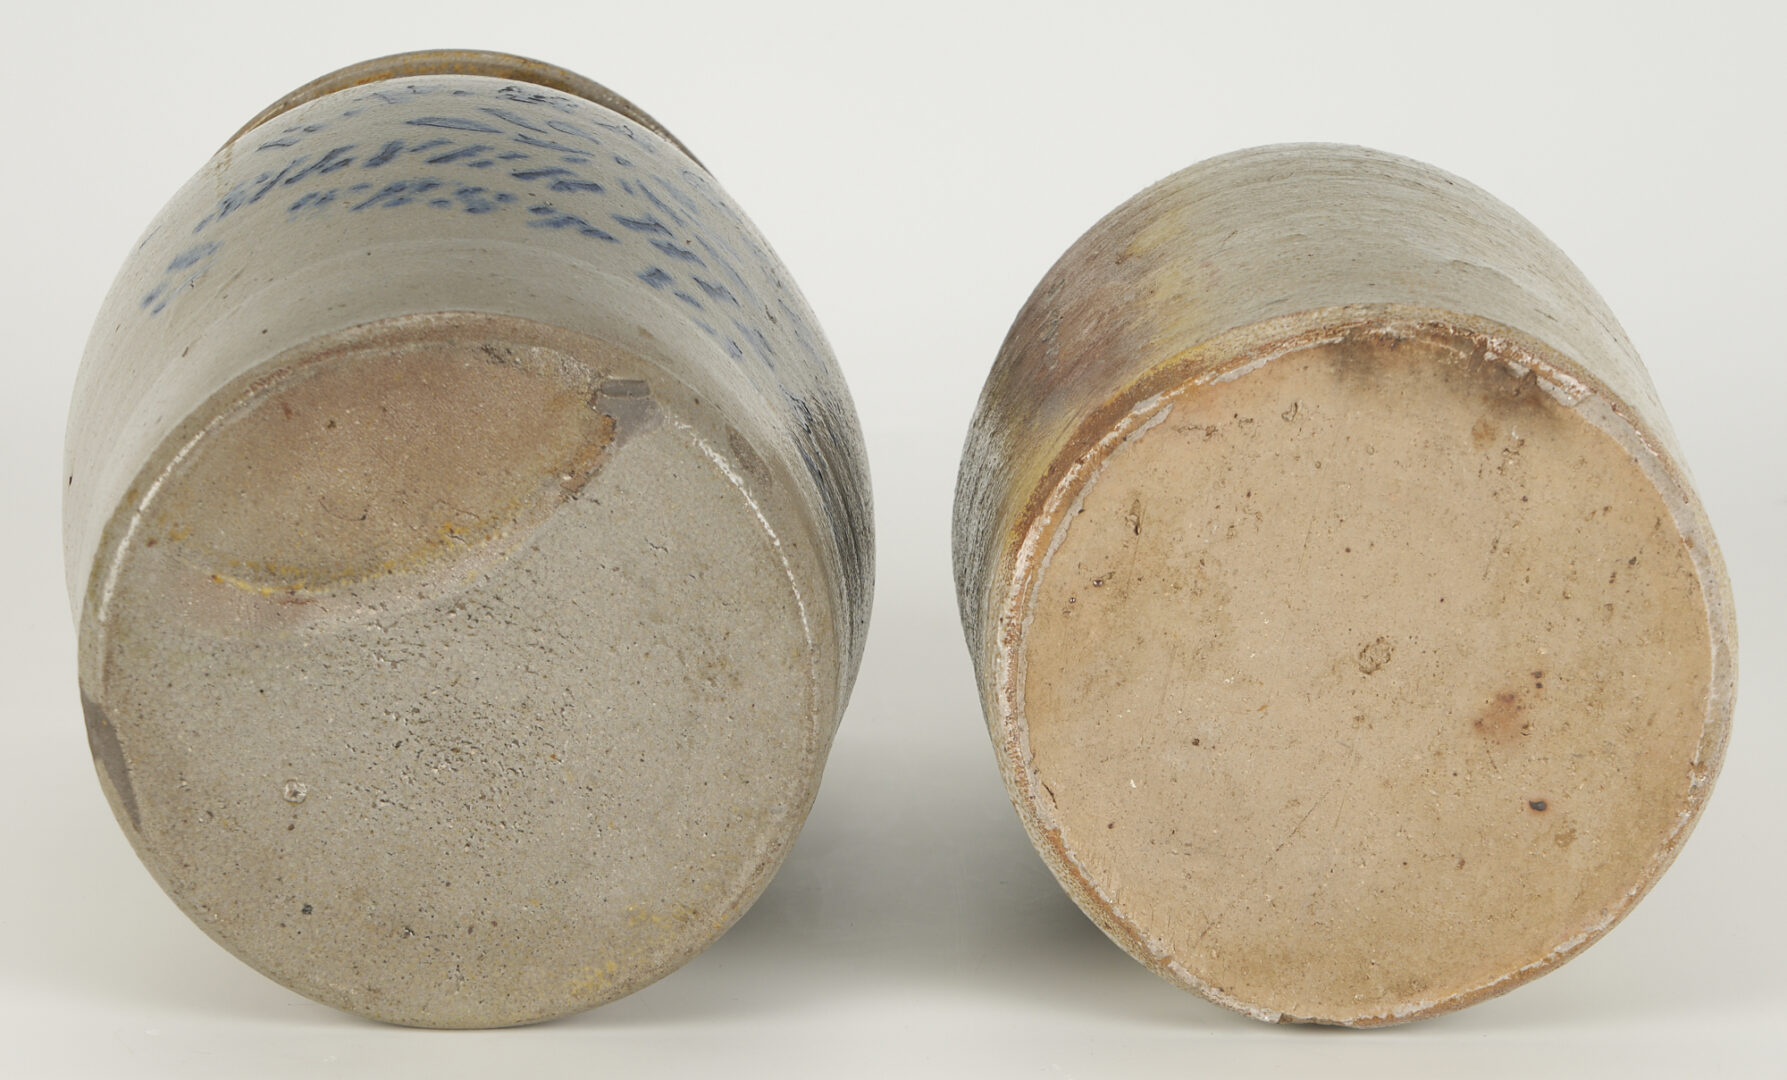 Lot 181: 2 Southern Stoneware Pottery Jars, incl. Haught – Silver Hill, West Virginia, Tally Jar